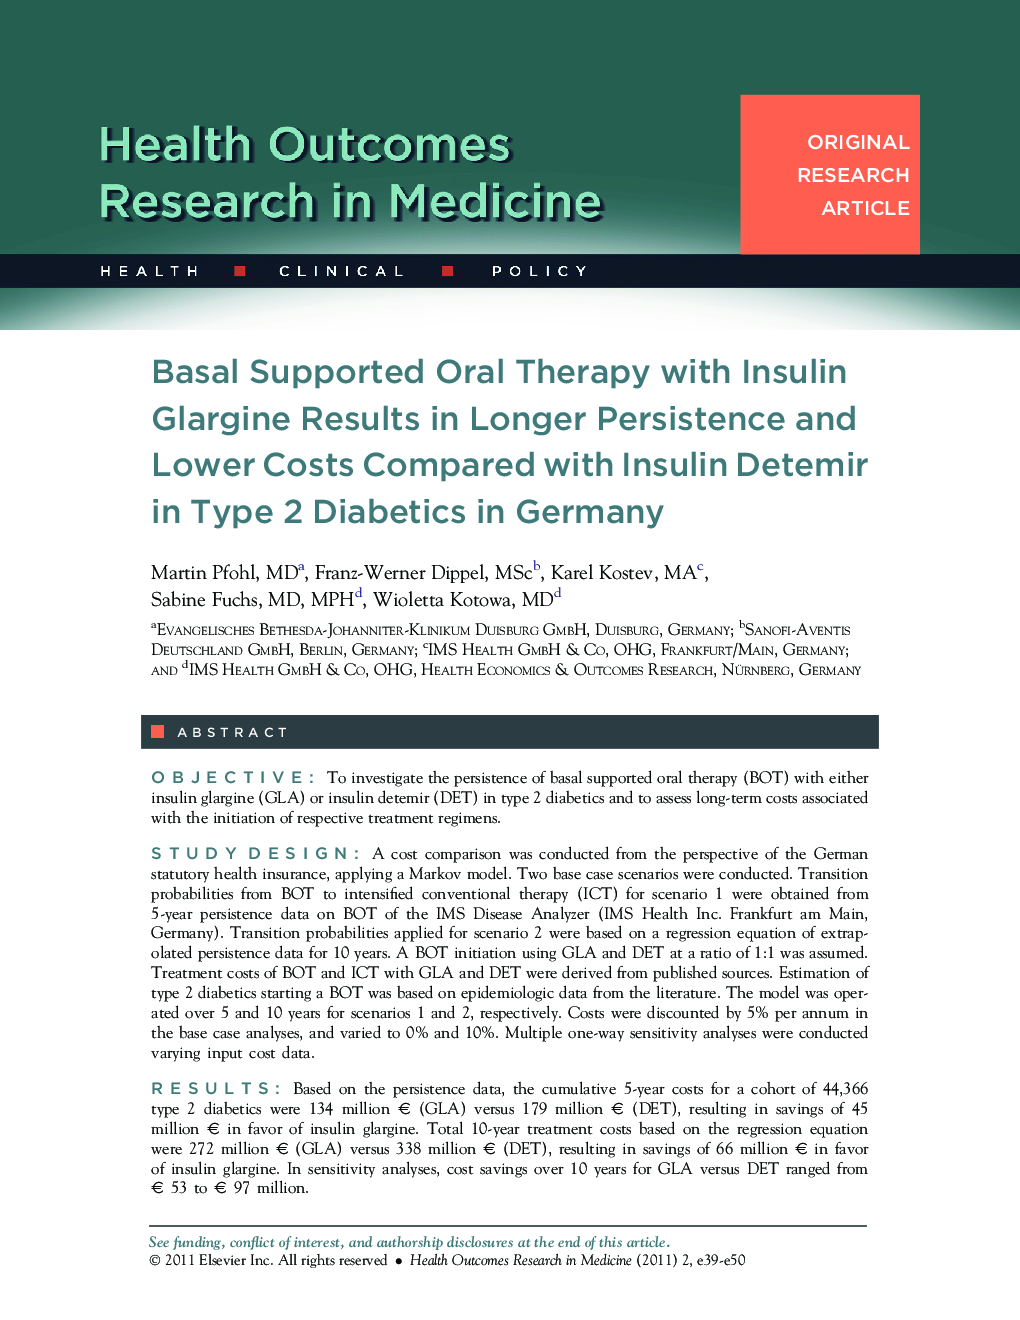 Basal Supported Oral Therapy with Insulin Glargine Results in Longer Persistence and Lower Costs Compared with Insulin Detemir in Type 2 Diabetics in Germany 